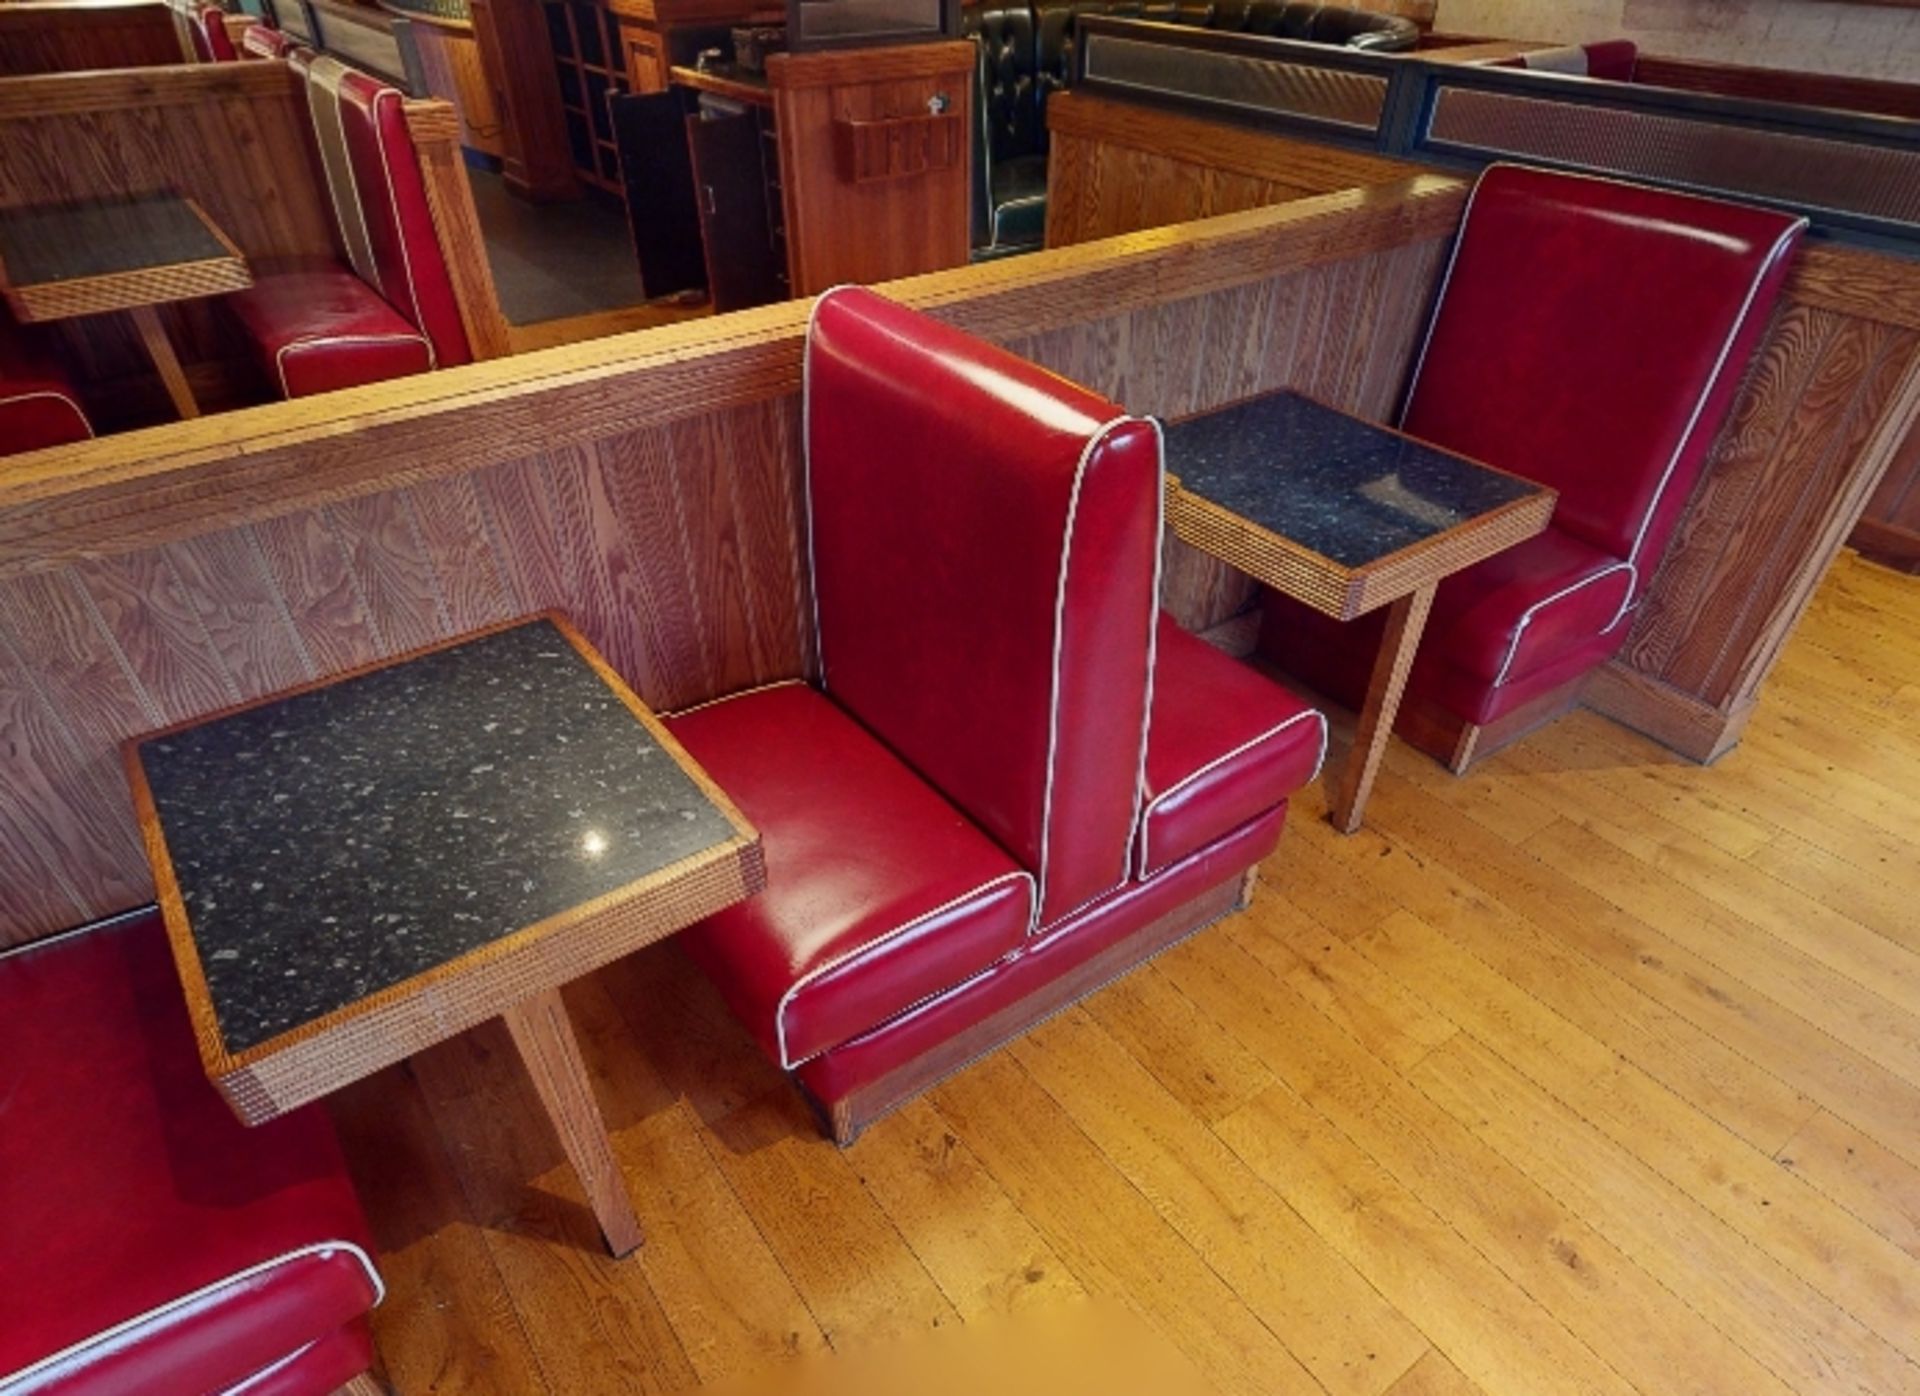 Selection of Single Seating Benches and Dining Tables to Seat Upto 10 Persons - Retro - 1950's - Image 3 of 6